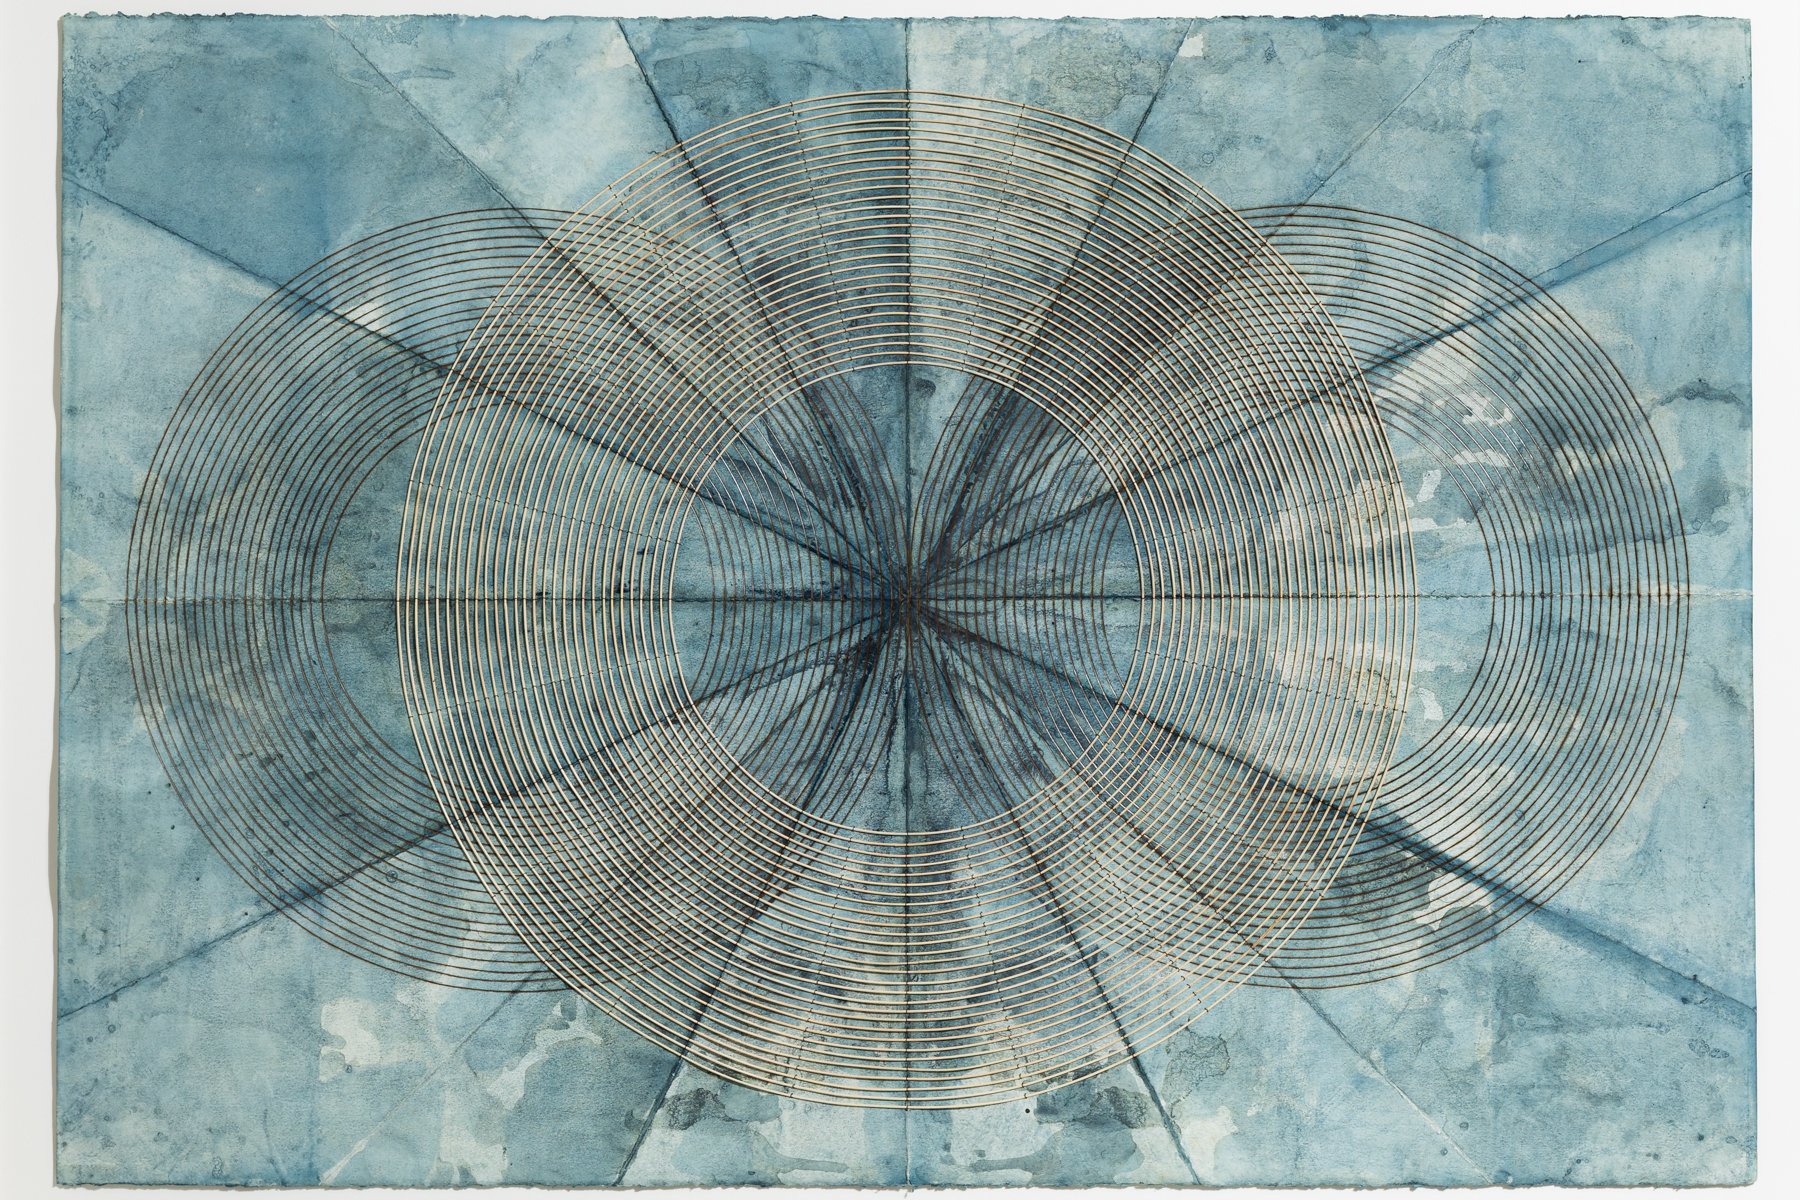 "Reflected Ripples" Geometric Art with Burned Lines and Dyed Reeds on Paper by Katrine Hildebrandt-Hussey @ Soapbox Arts Gallery, Burlington, VT